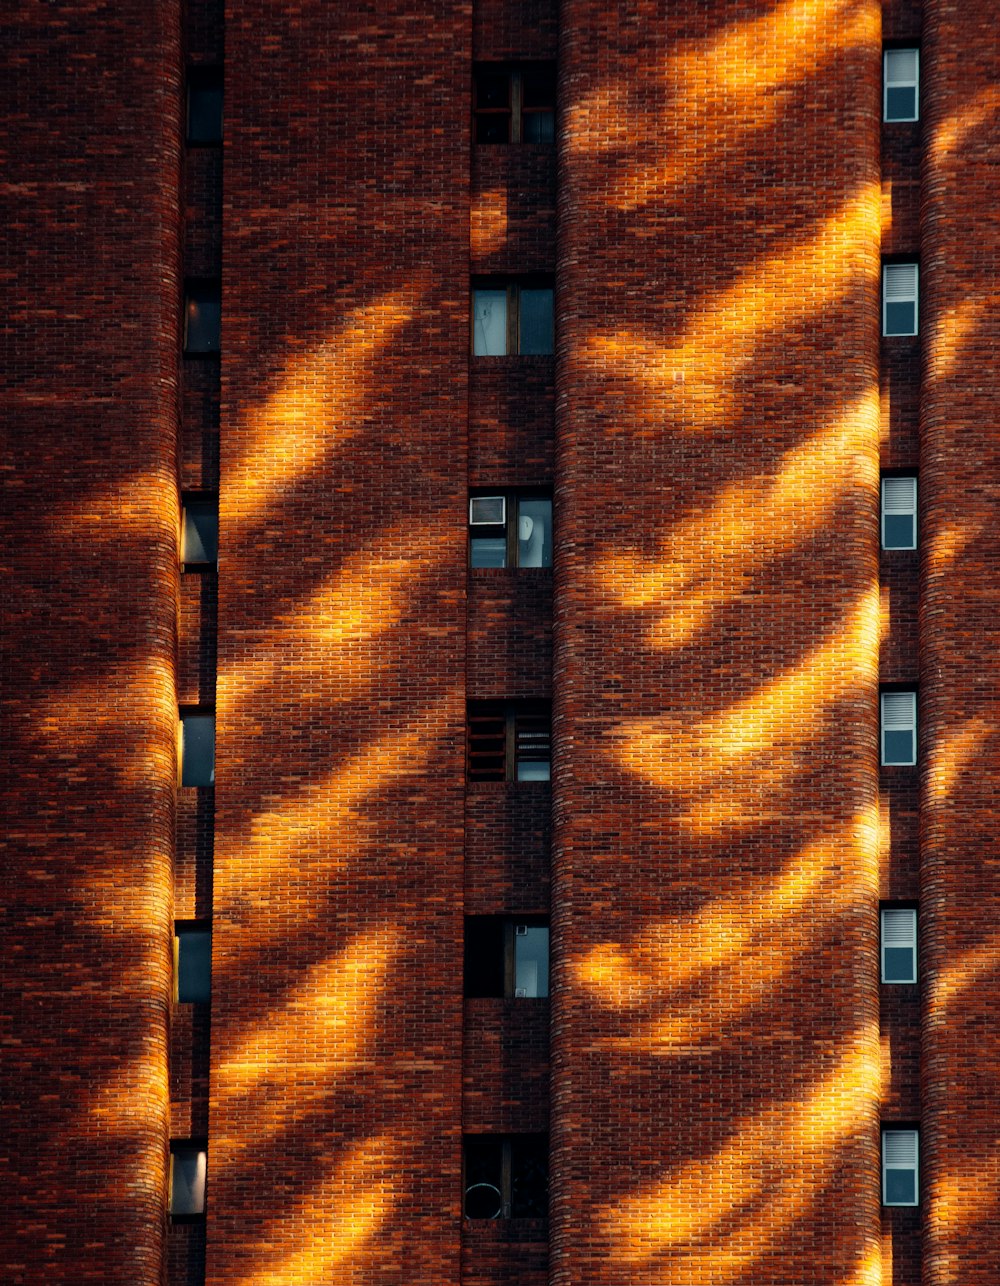 the shadows of a building are cast on the wall